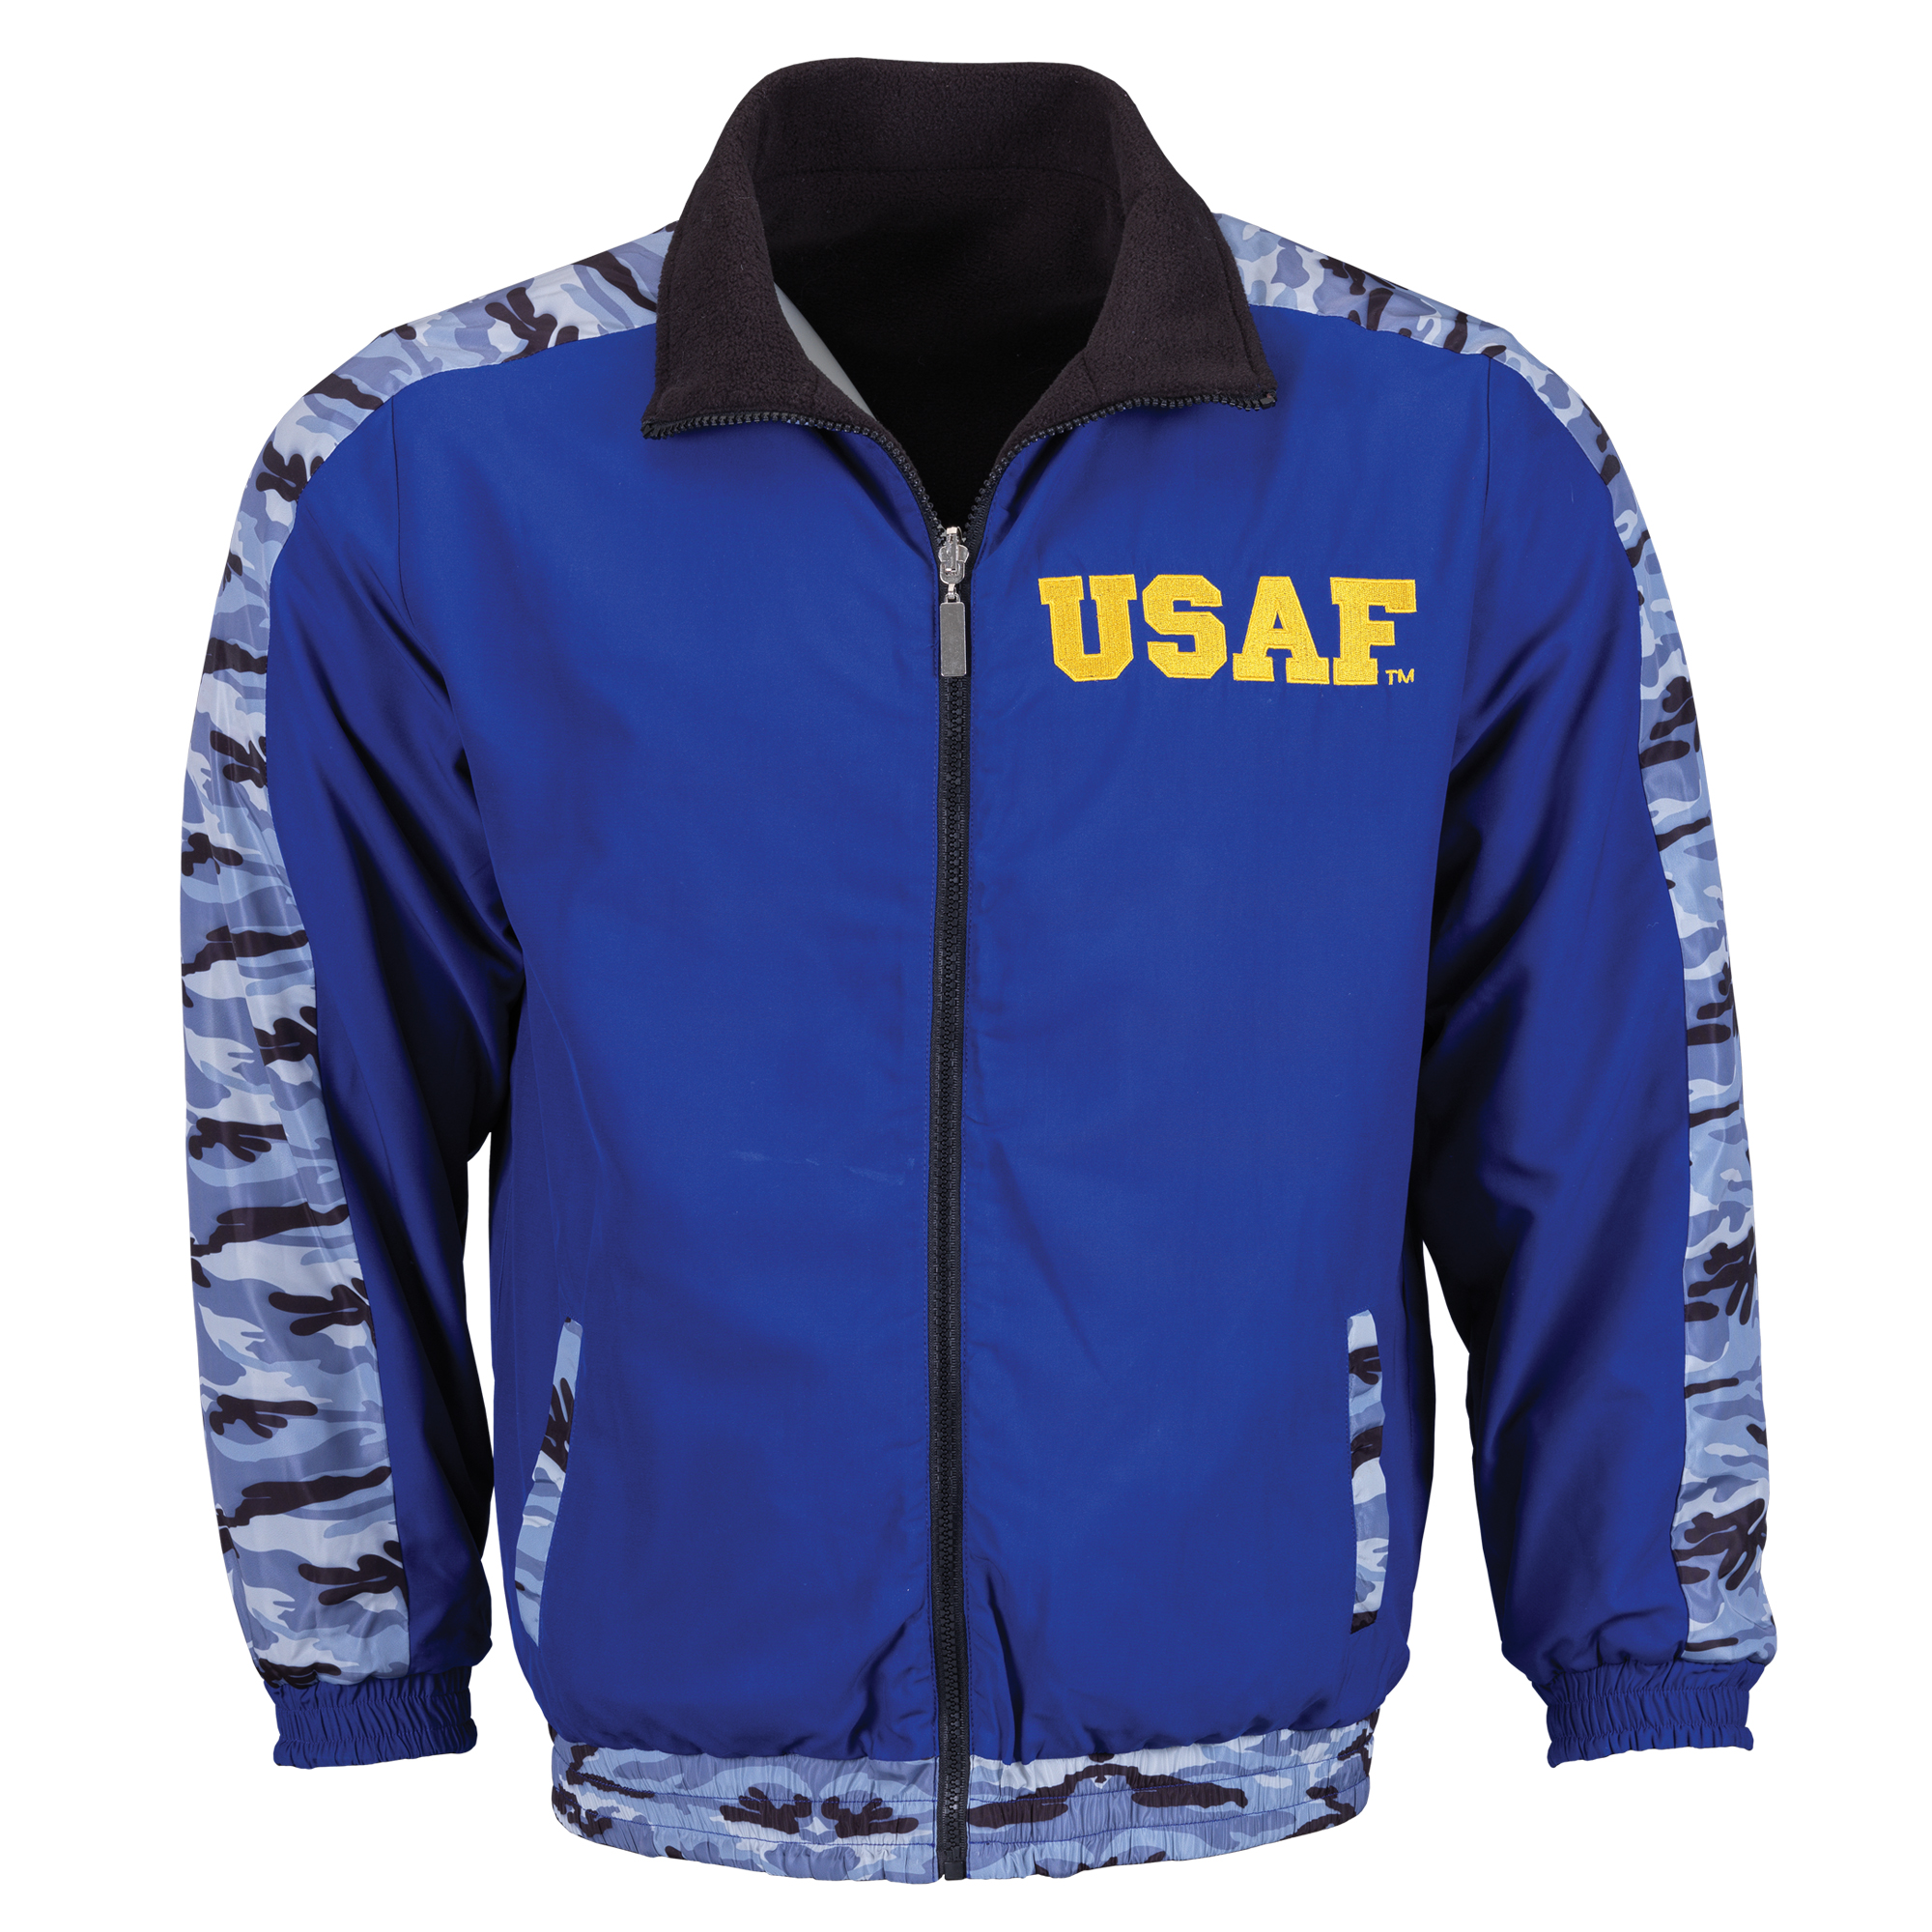 Personalized Reversible U S Air Force Bomber Jacket 5672 0048 a main